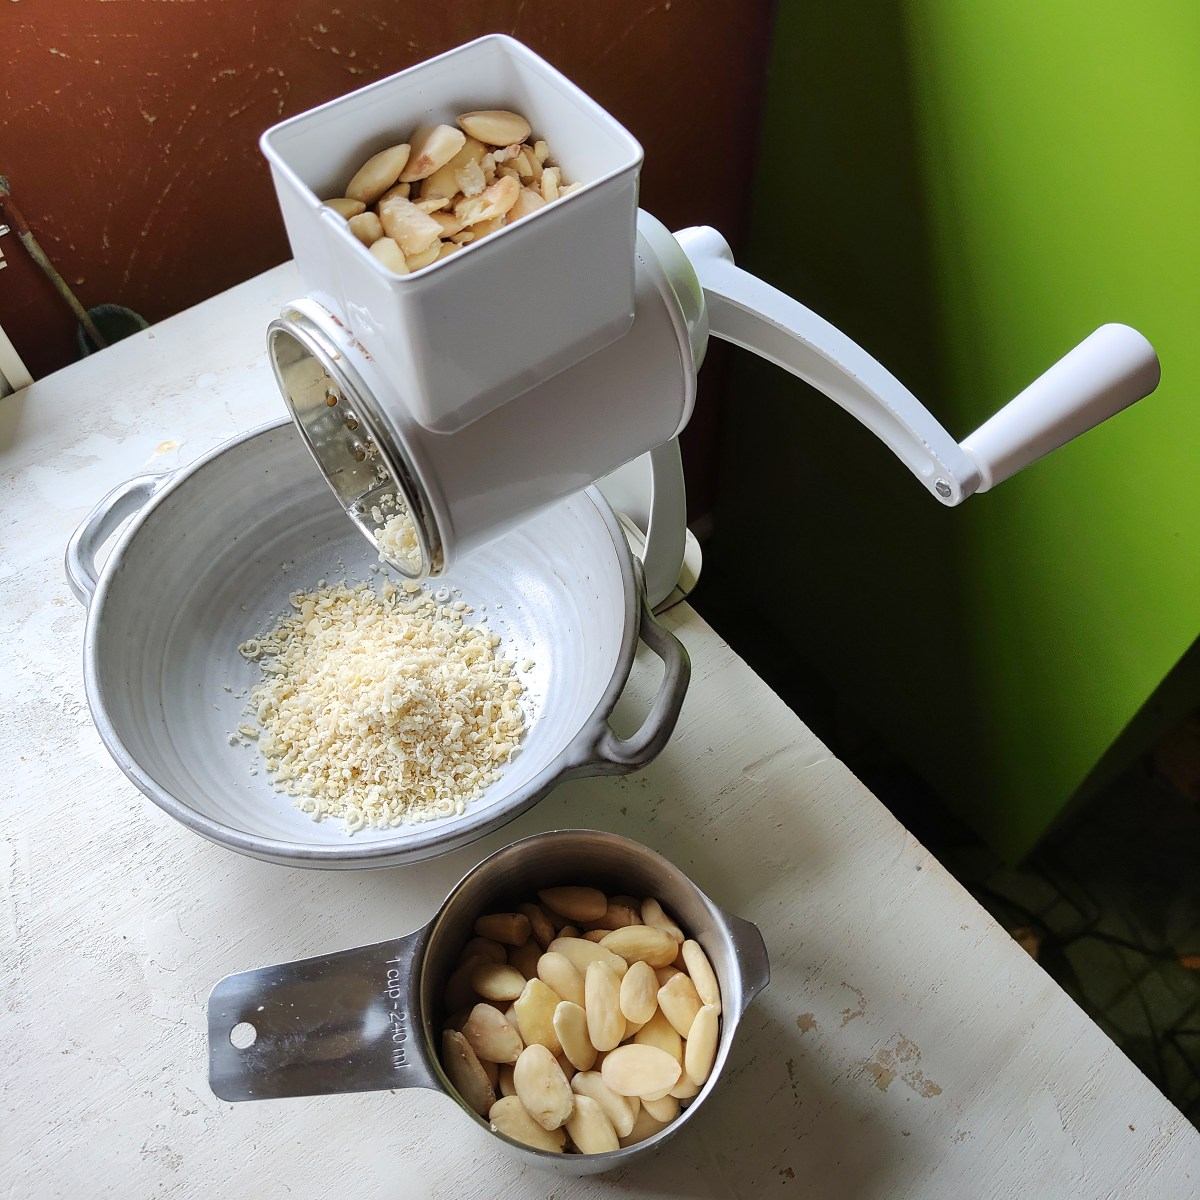 Grinding blanched almonds on a rotary hand grater.